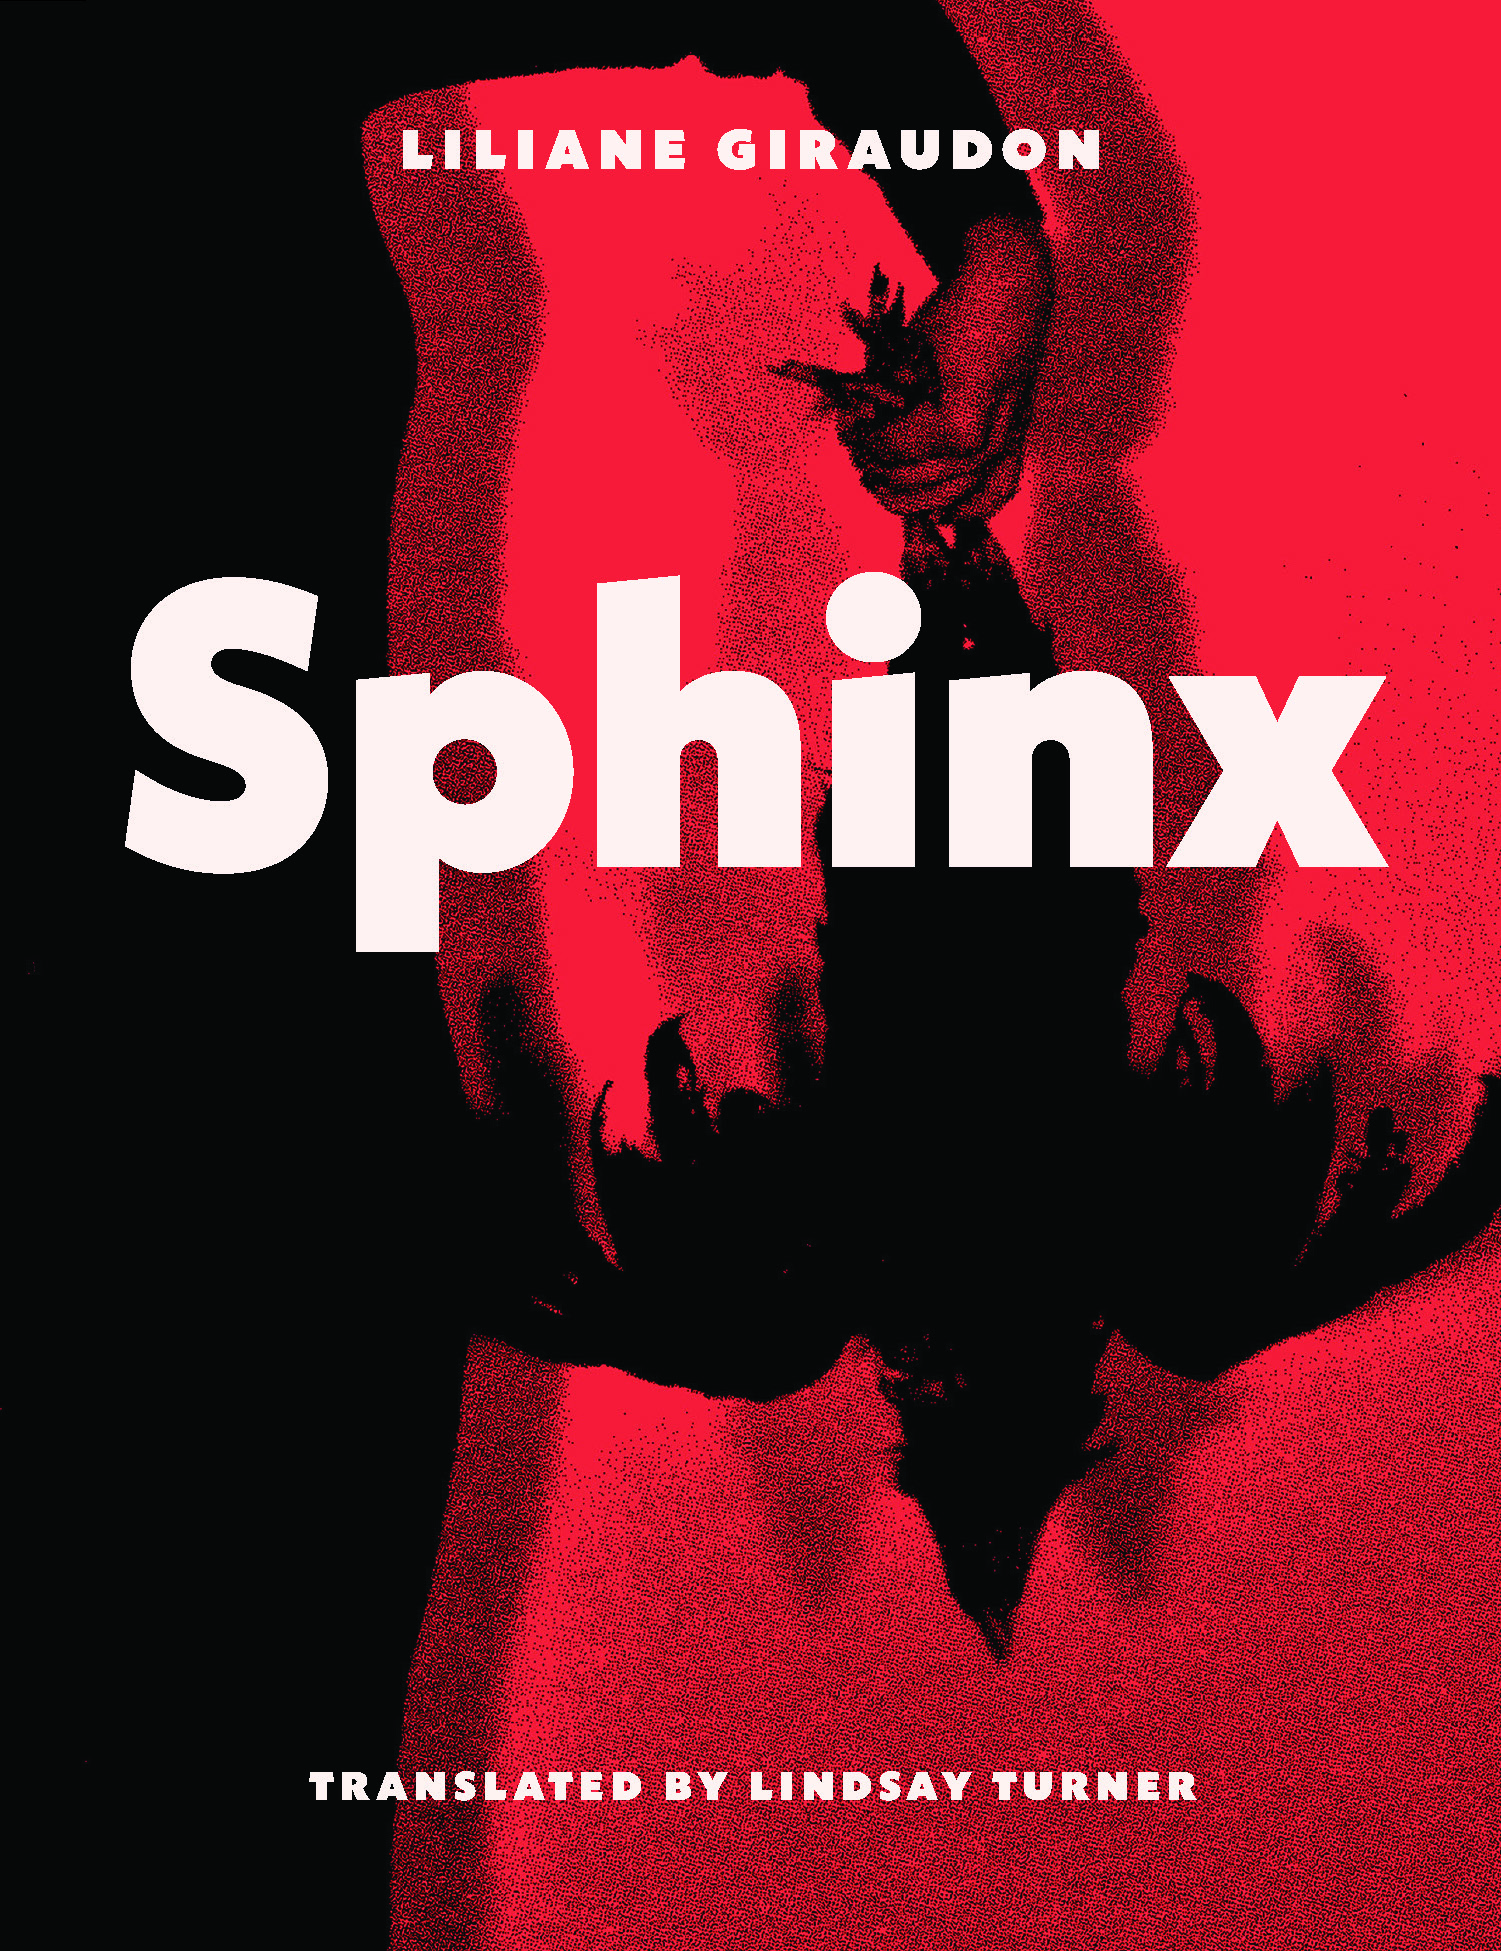 Cover image for Sphinx by Liliane Giraudon shows the silhouette of a woman holding a bird upside down by the feet with wings splayed against a red background